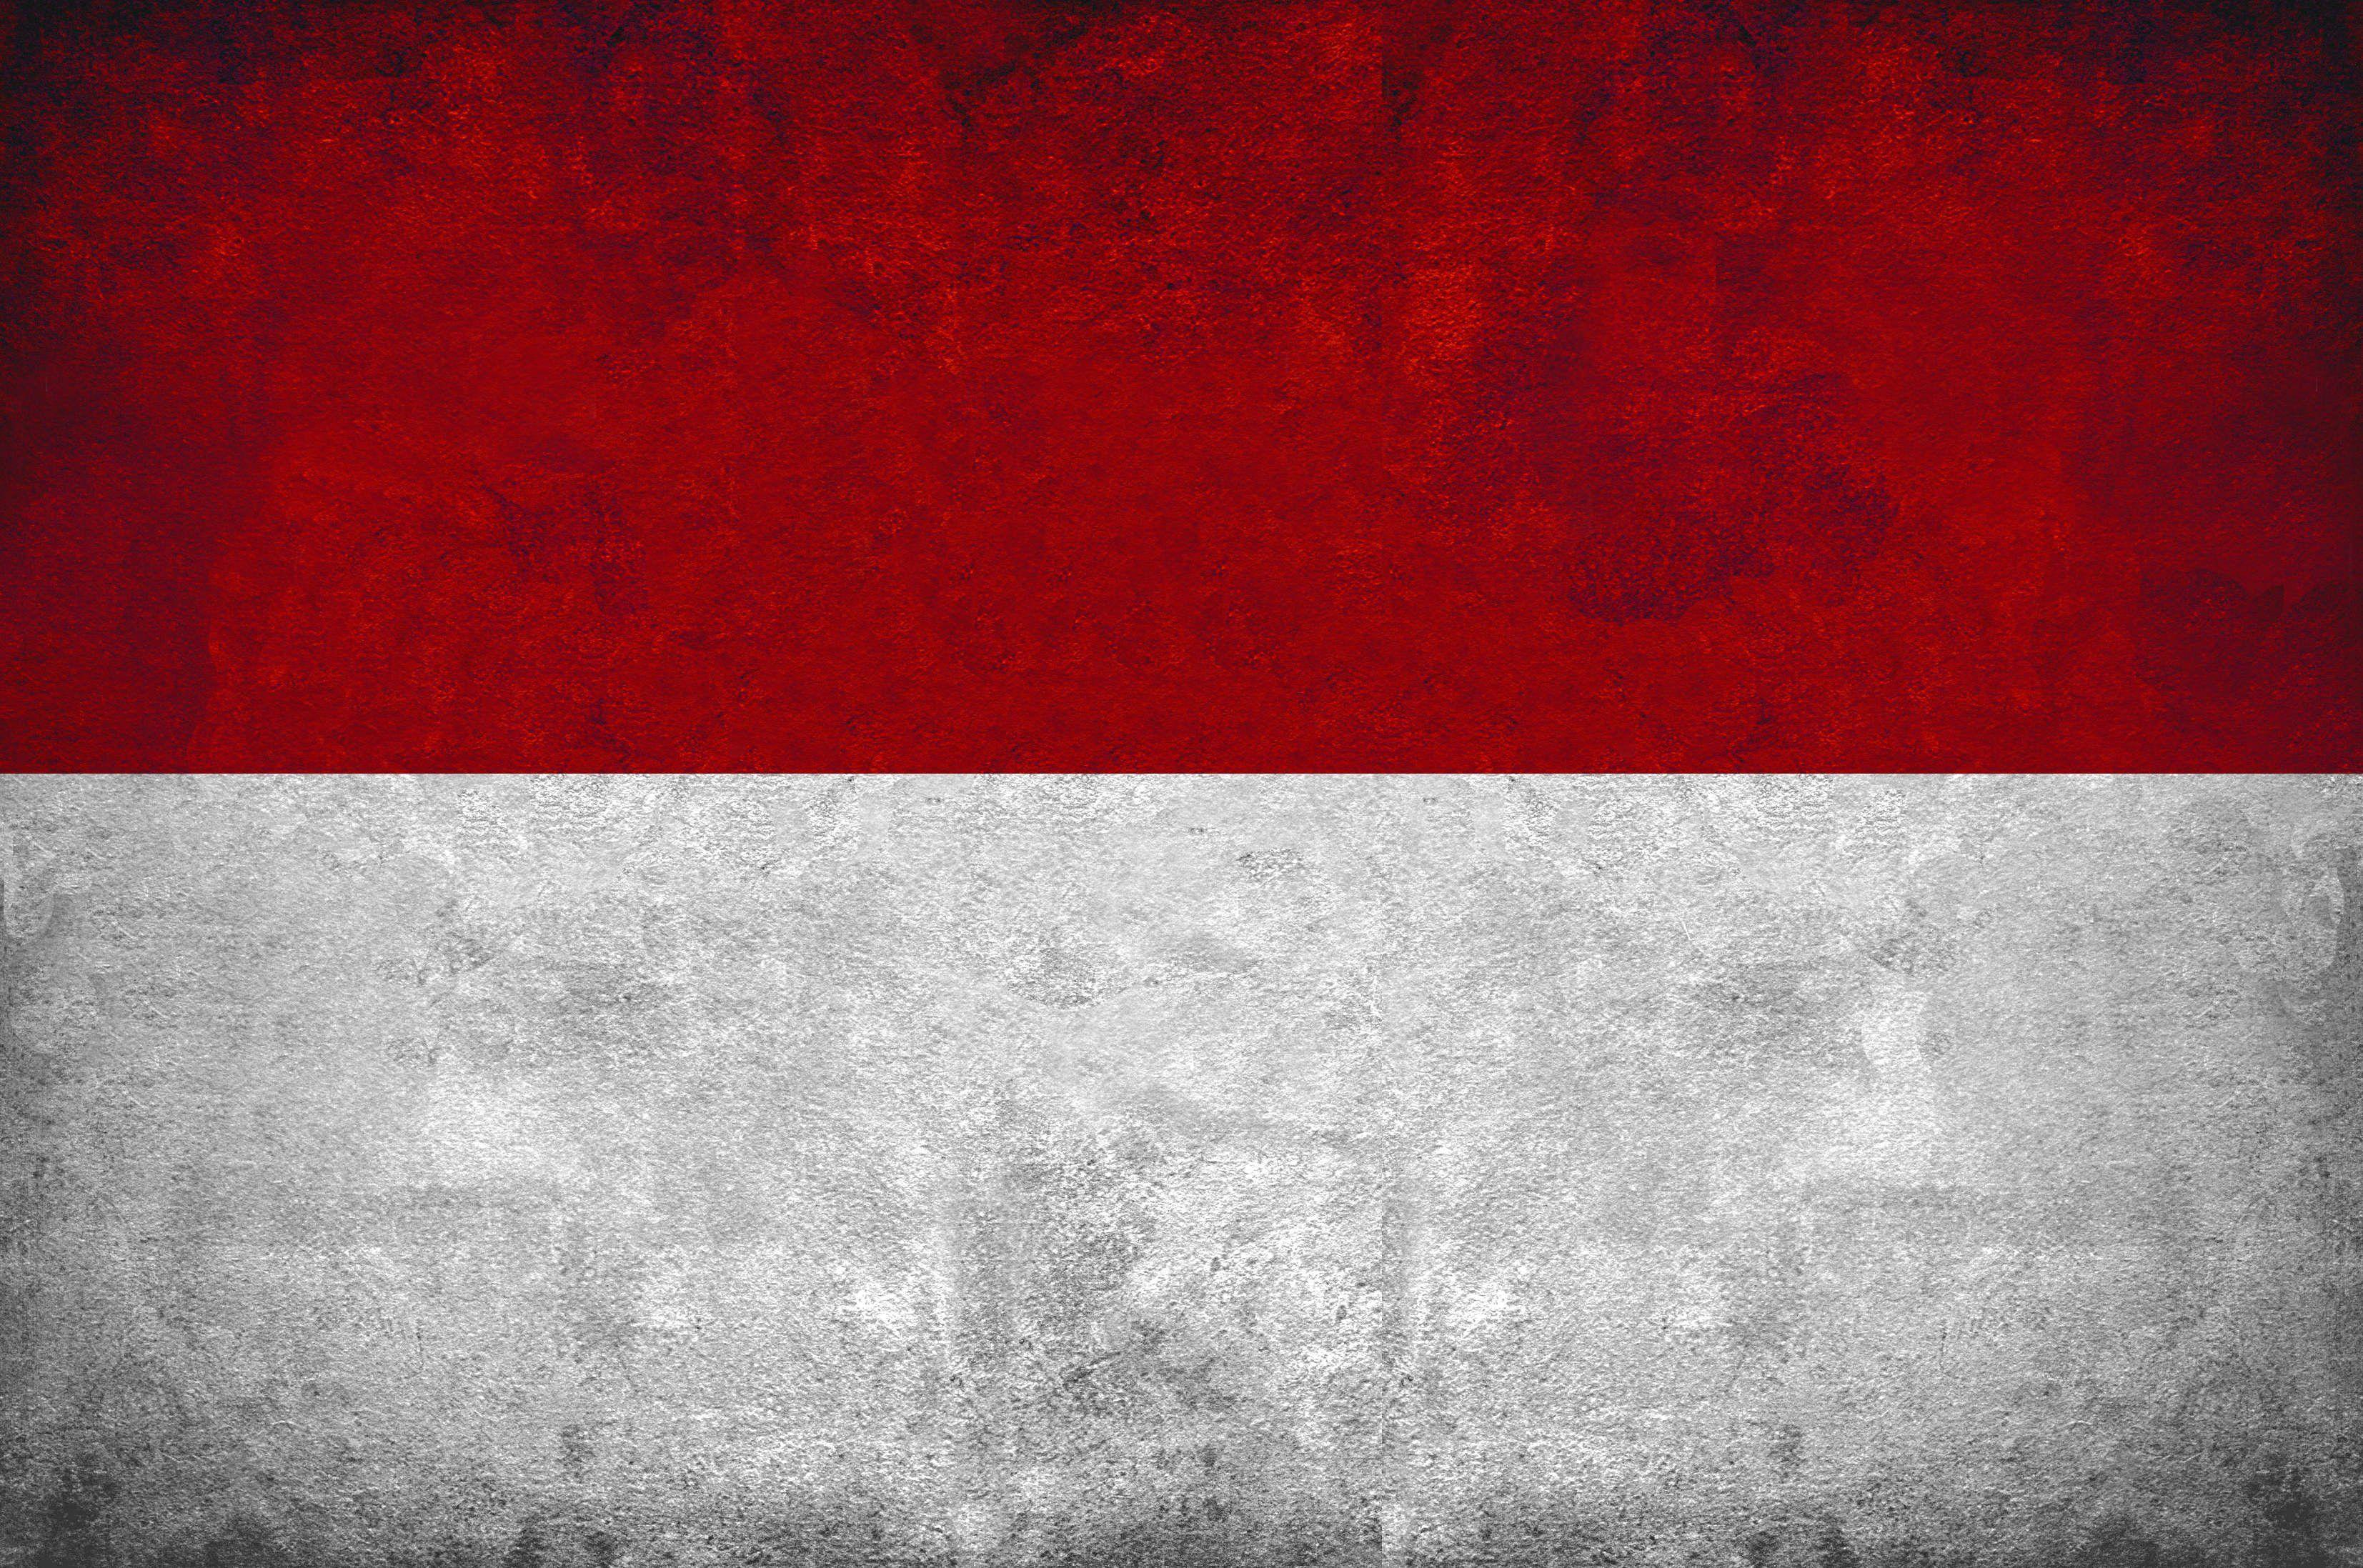 Indonesia Flag Wallpapers - Top Free Indonesia Flag ...